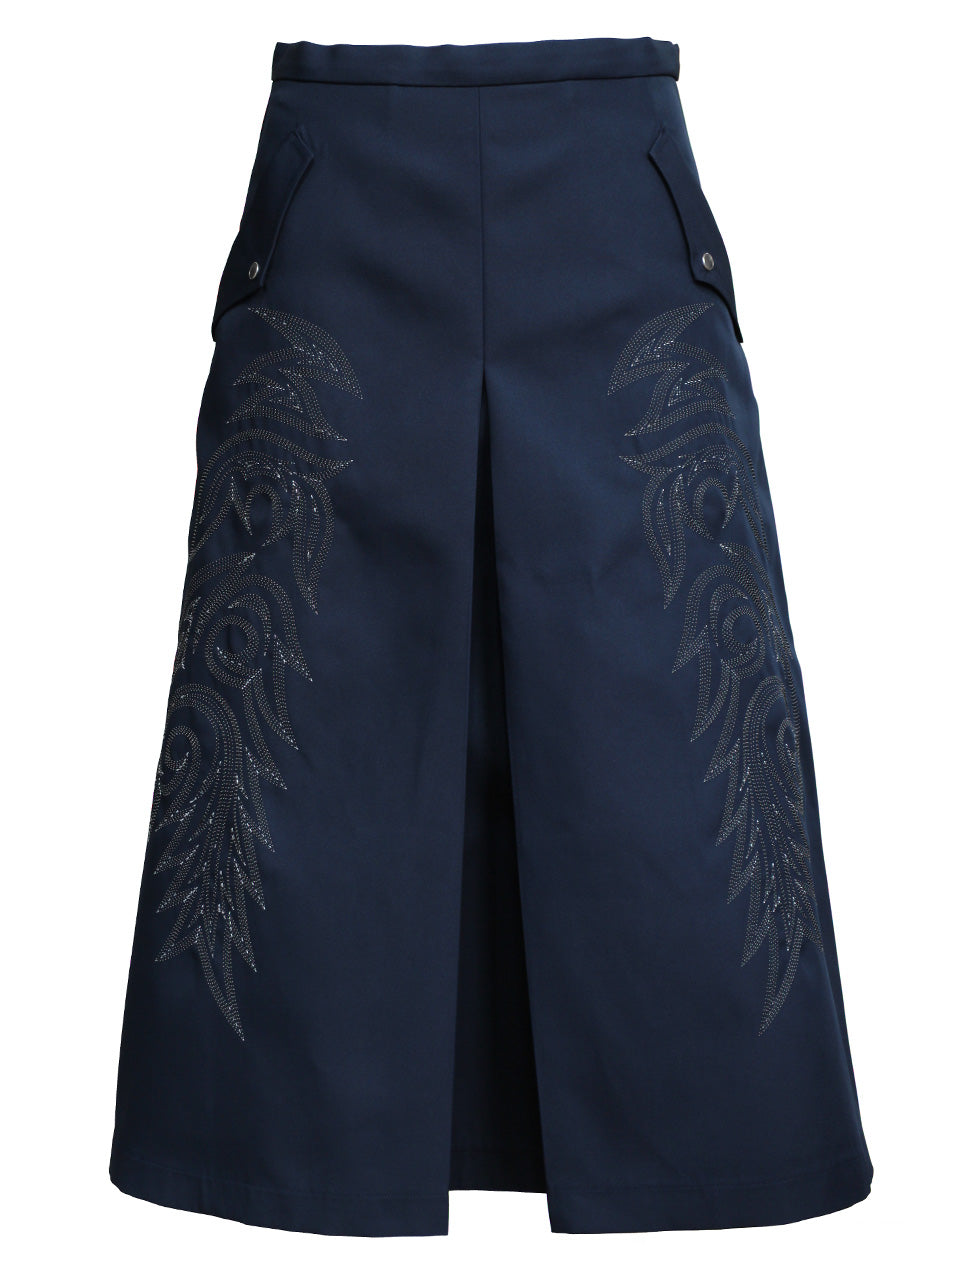 Embroidery Skirt (navy)